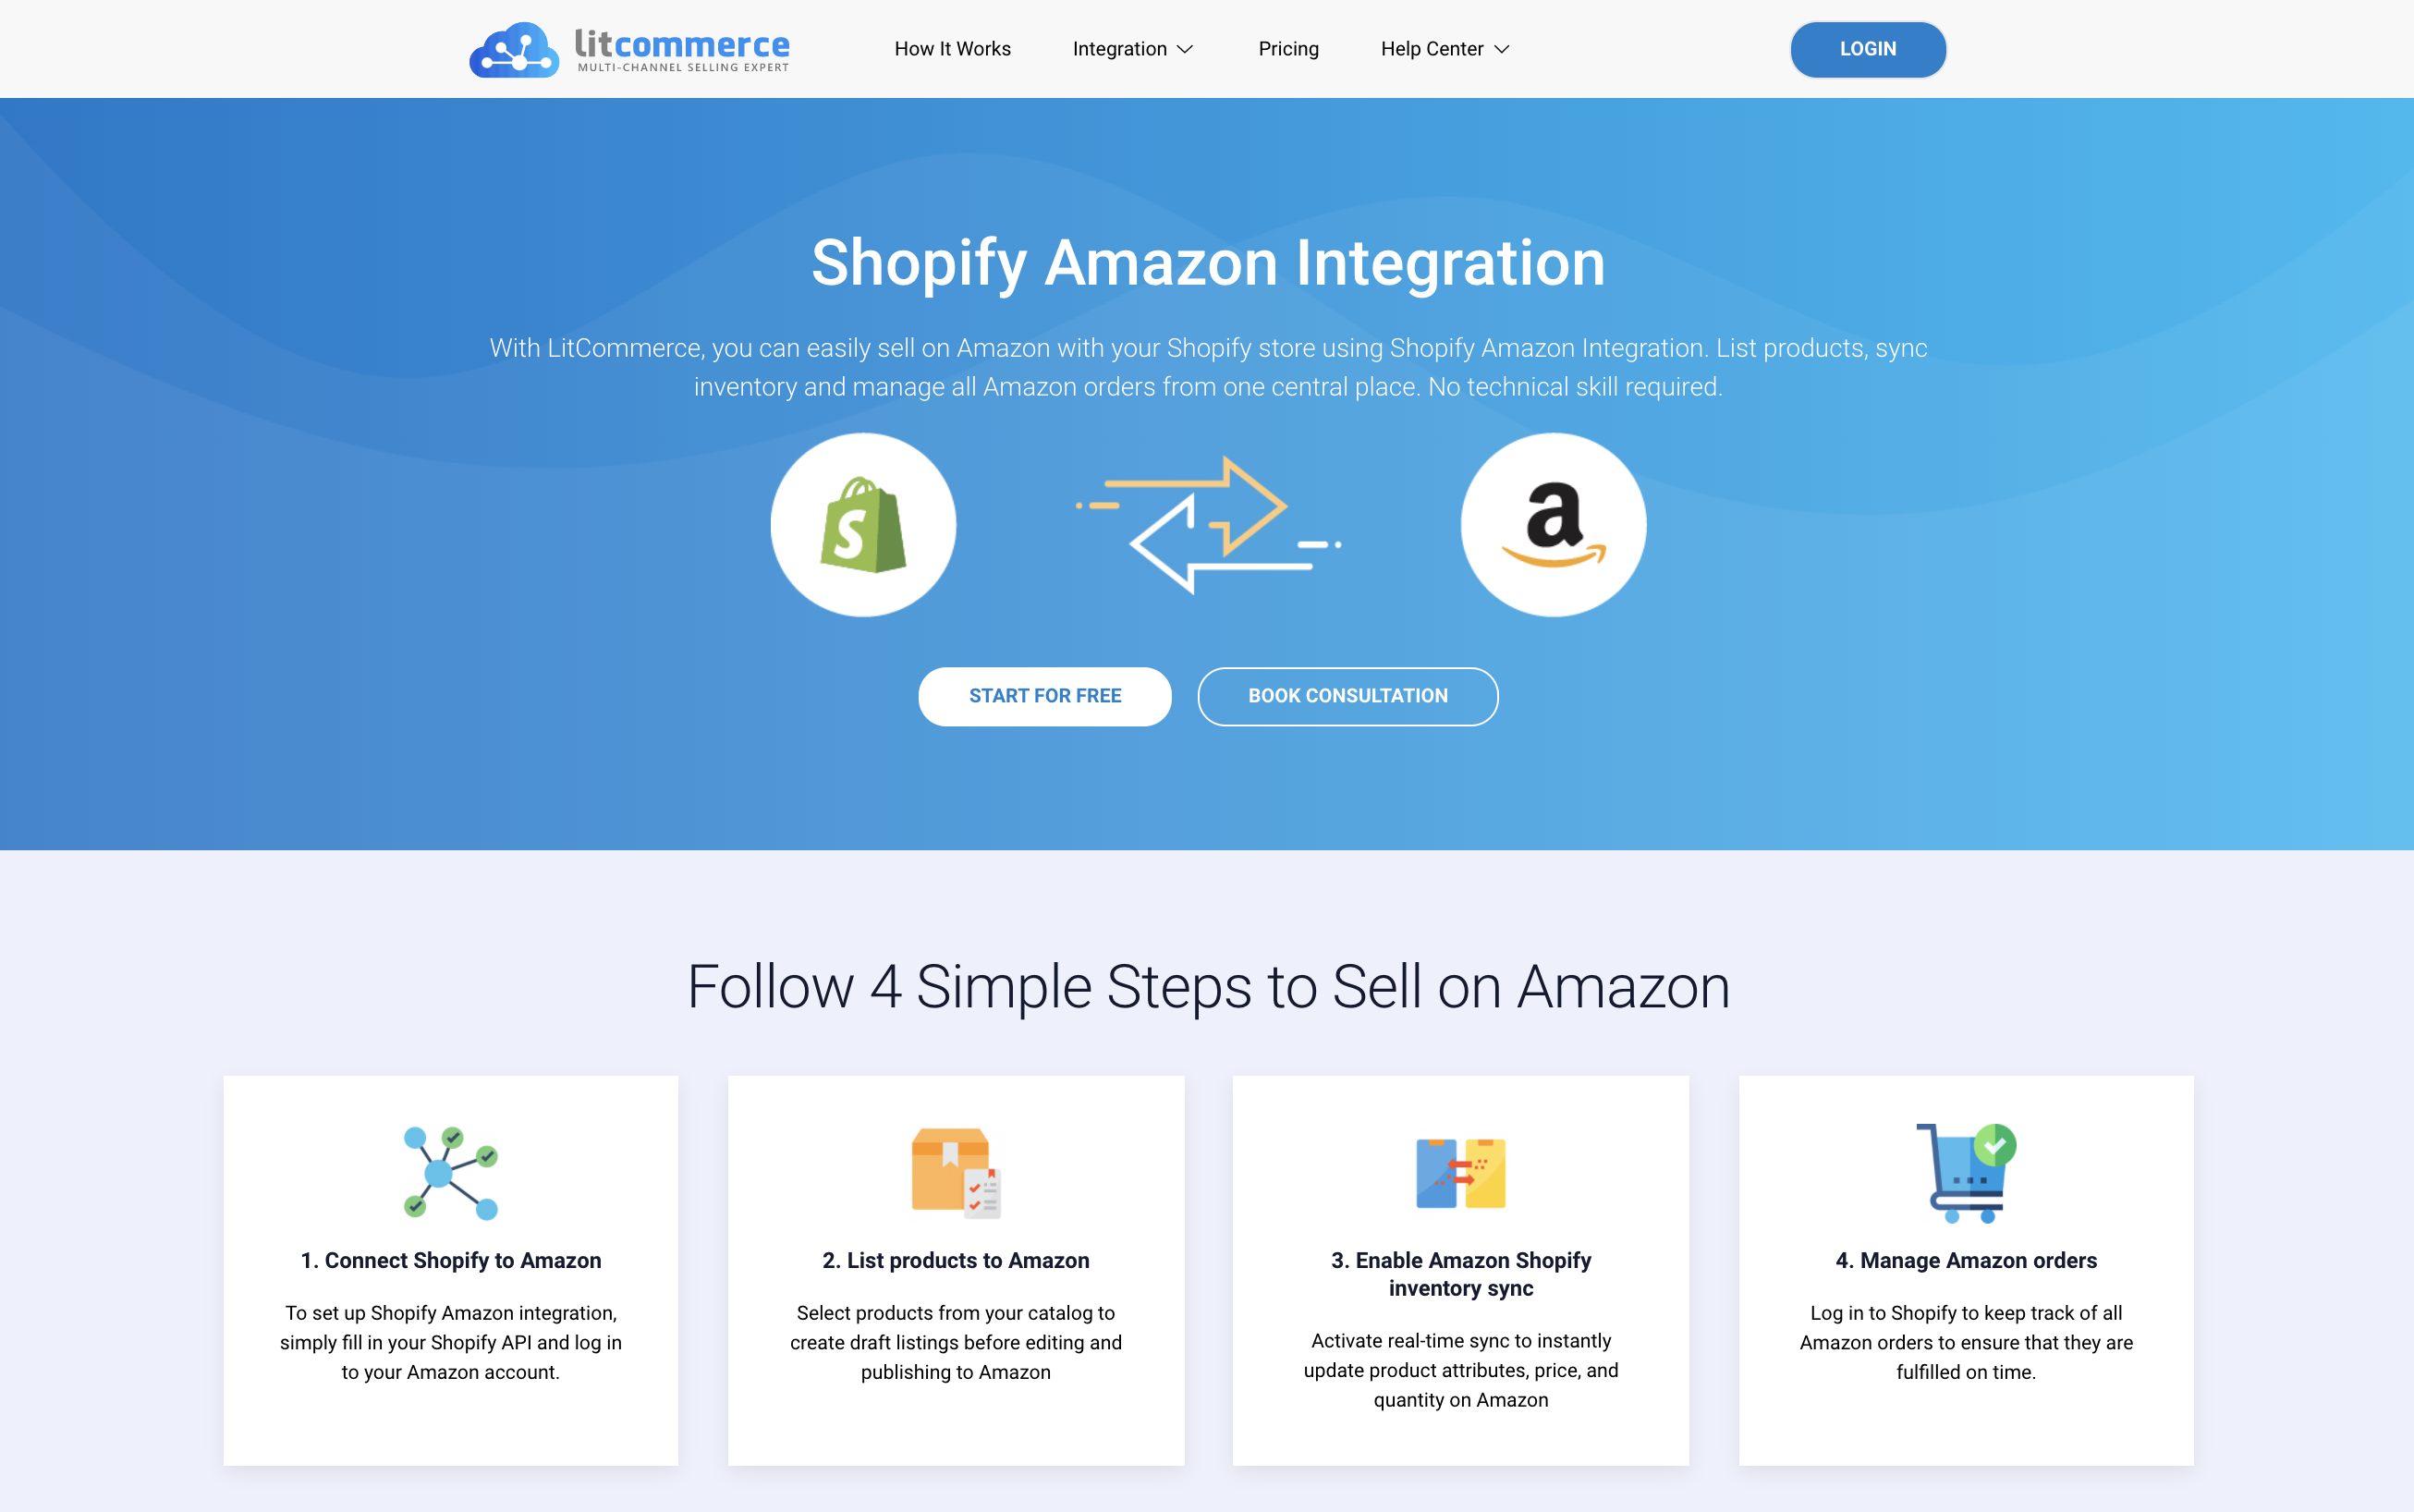 Shopify Amazon Integration with LitCommerce